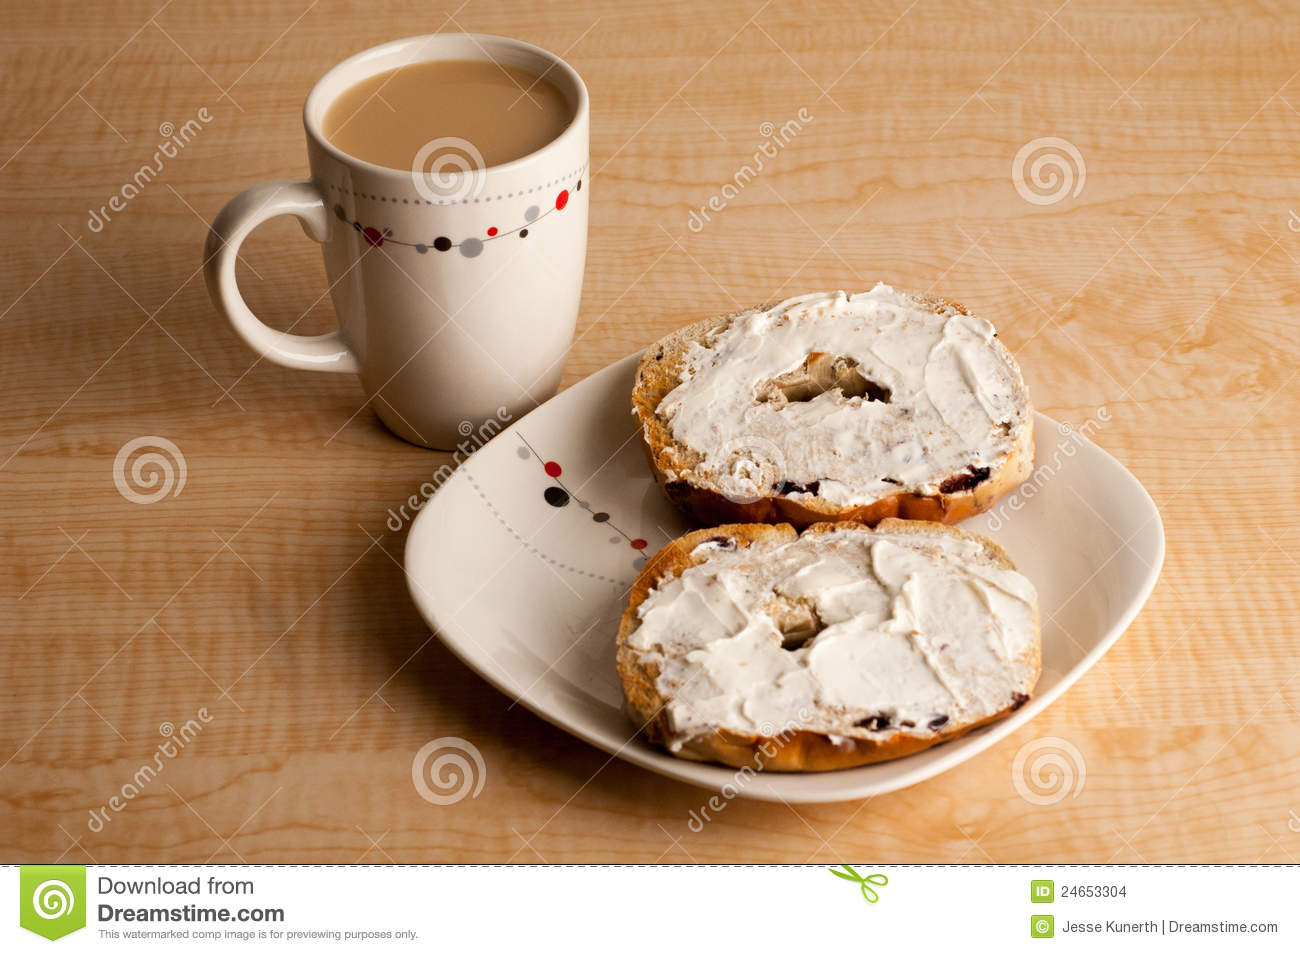 Bagels And Coffee Stock Images   Image  24653304